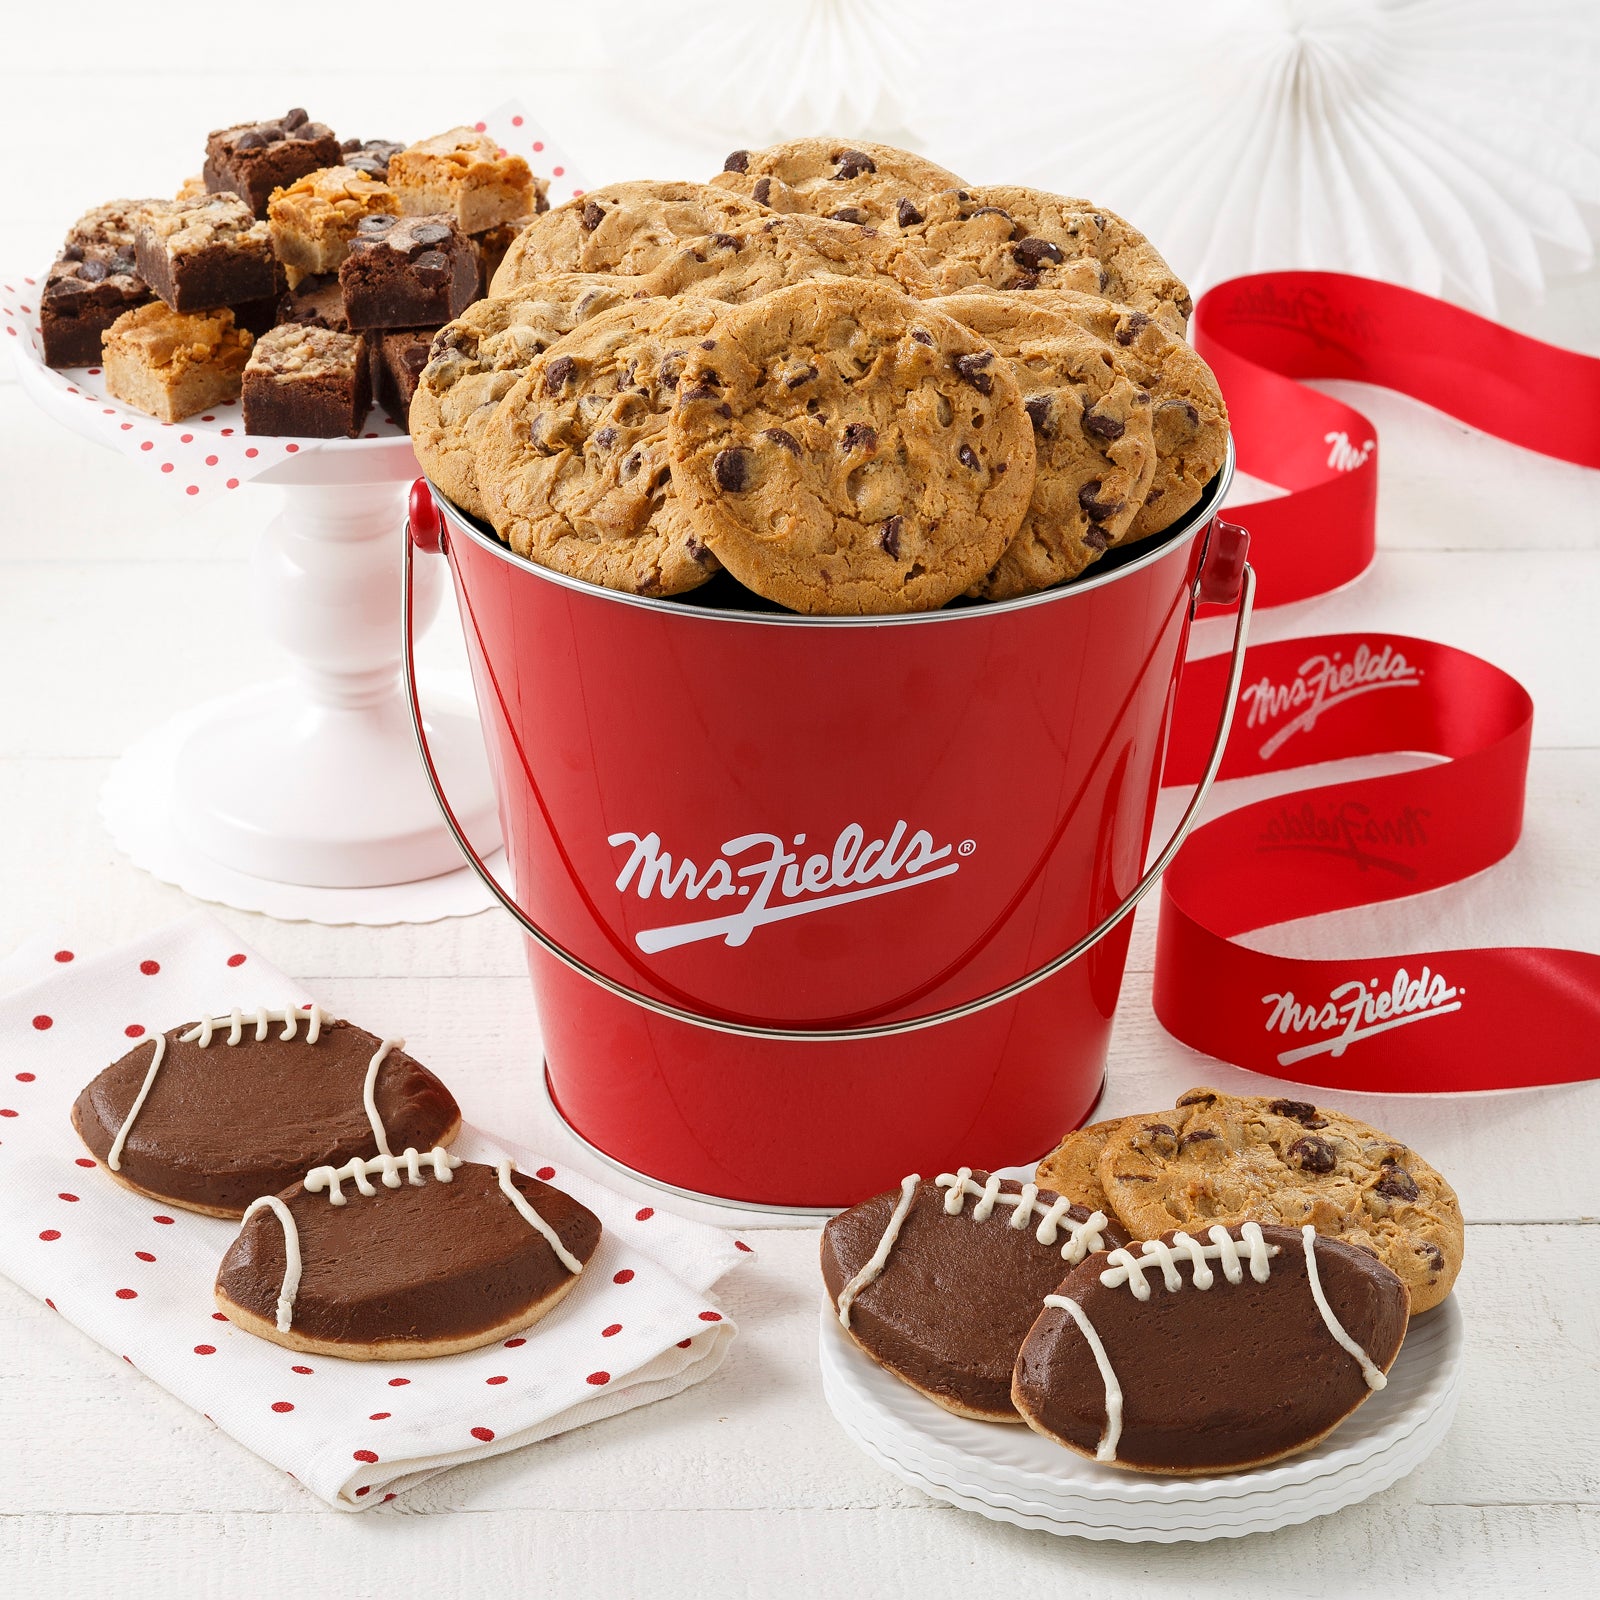 A signature Mrs. Fields pail filled with 12 semi-sweet chocolate chip original cookies, an assortment of brownie bites, and four frosted football cookies